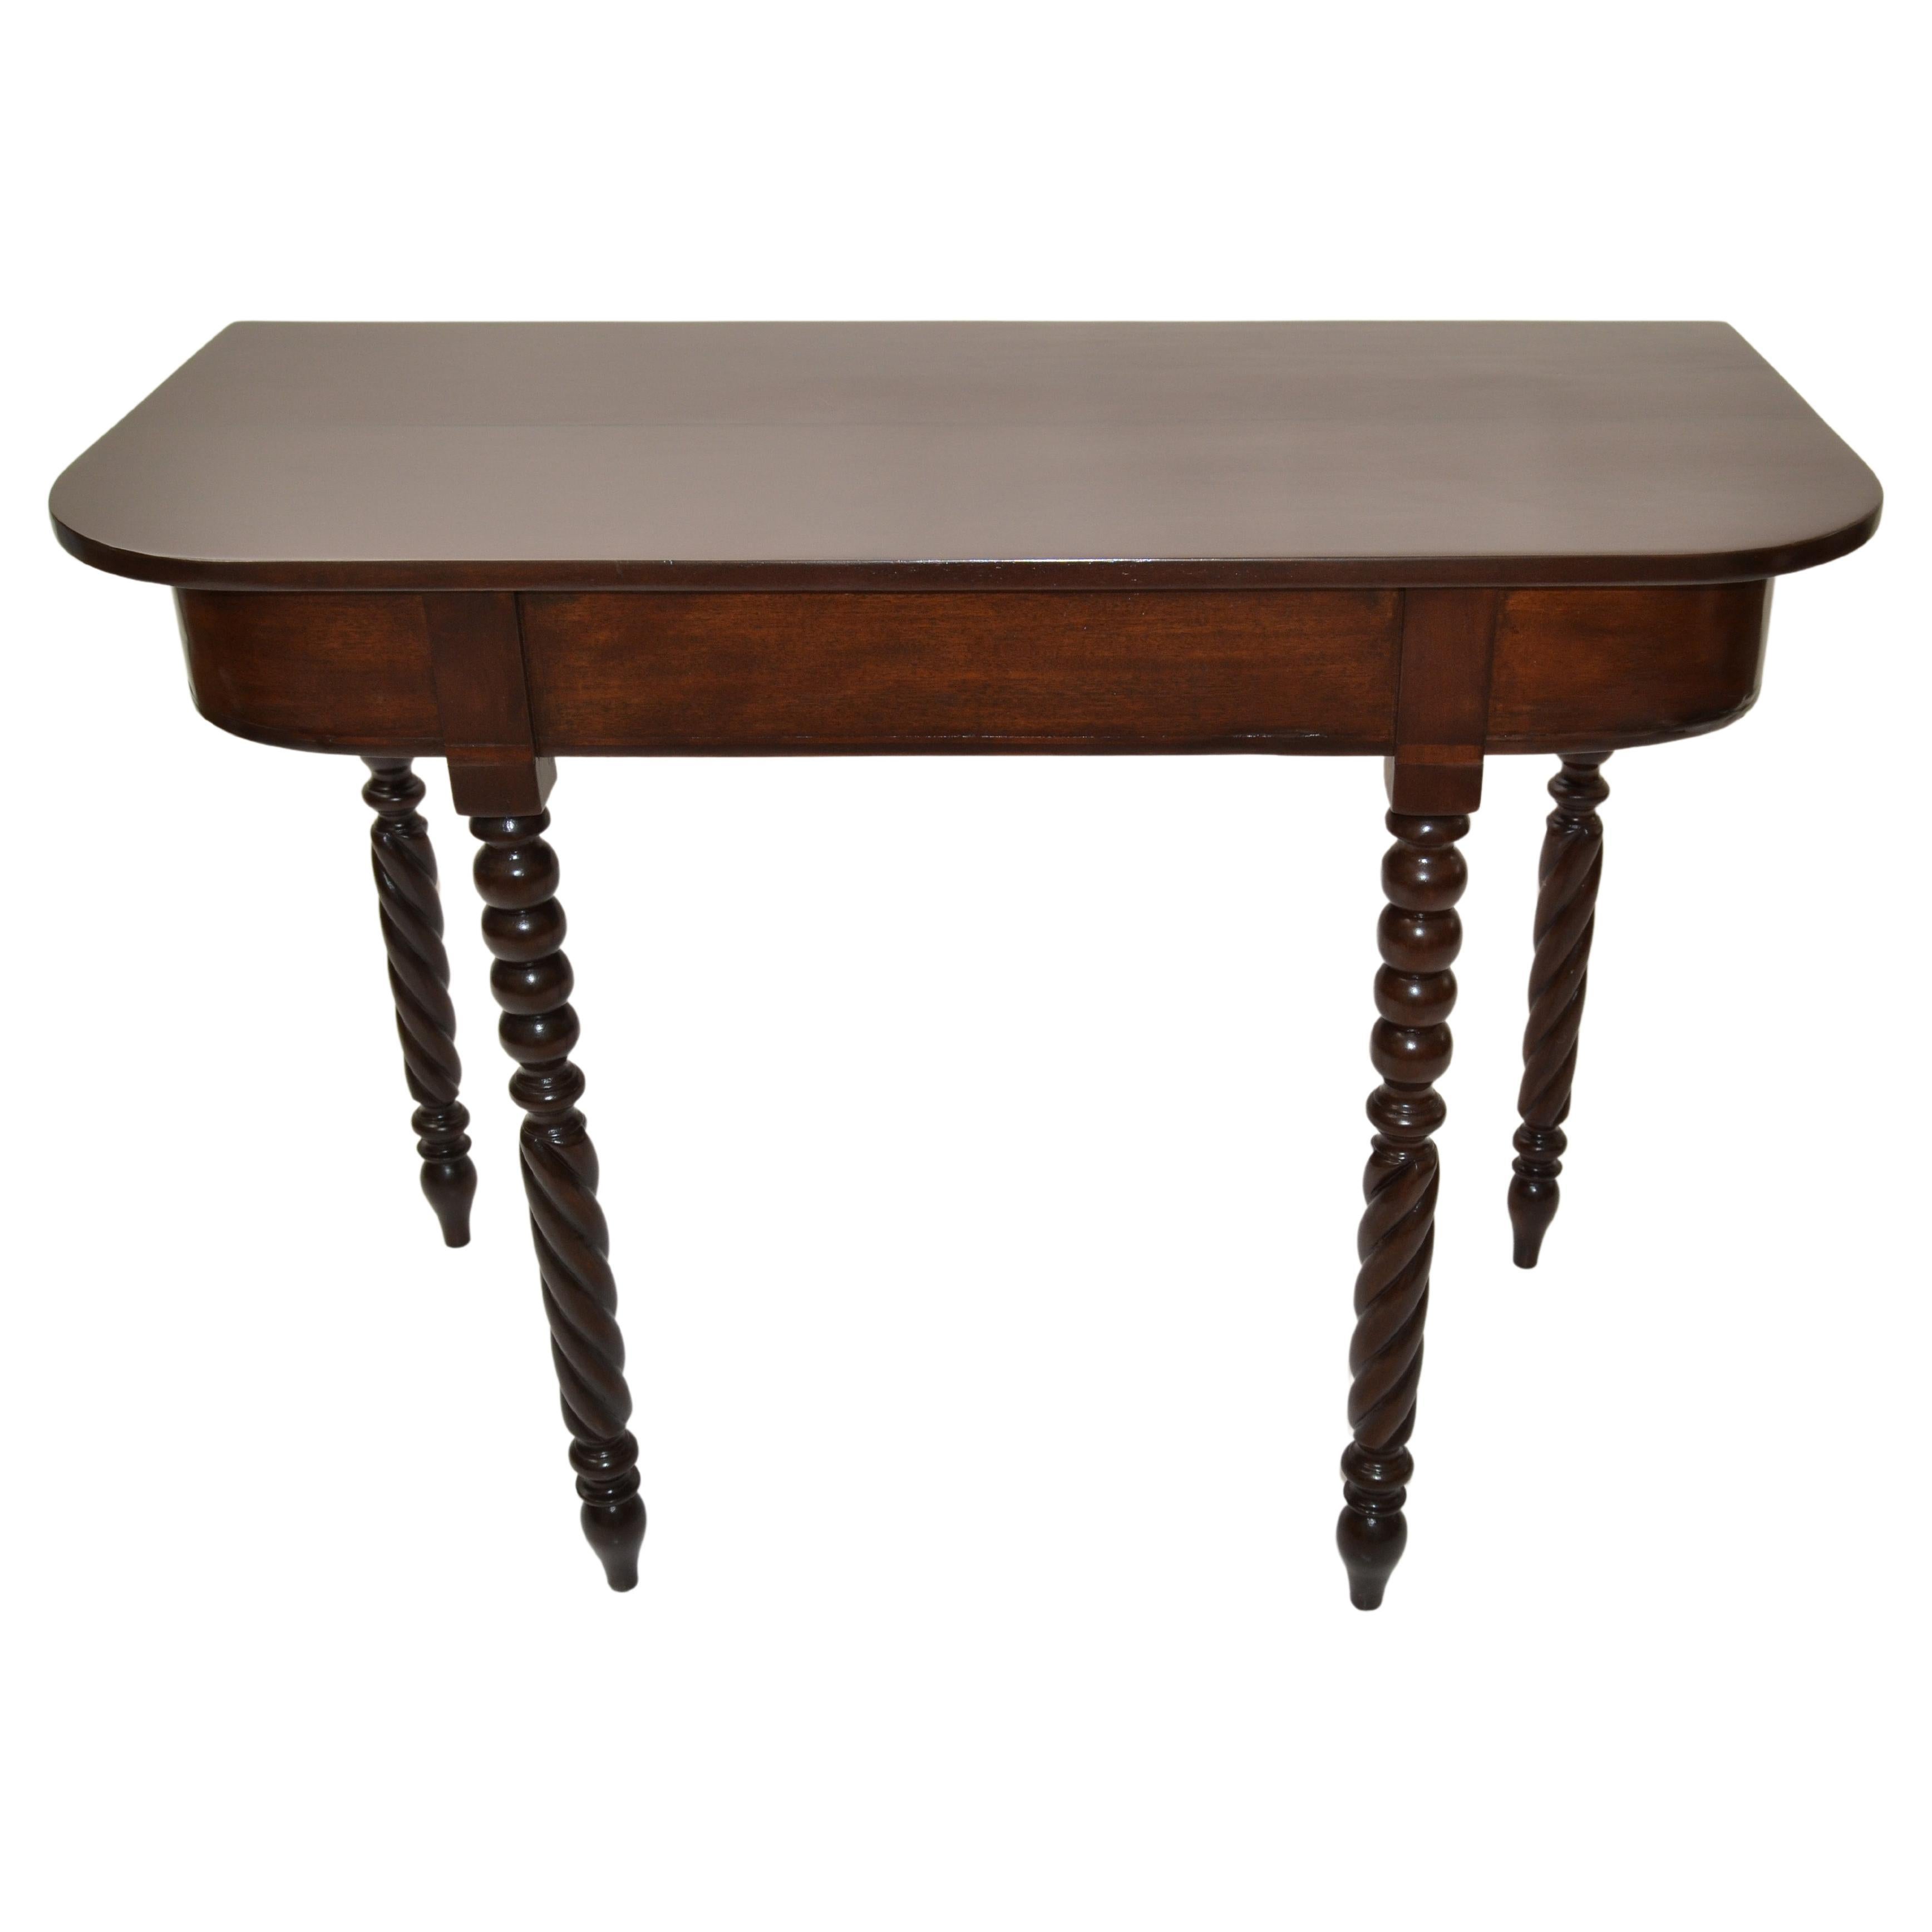 19th Century Brown Finish Console or Hallway Table Vanity Turned Tapered Legs For Sale